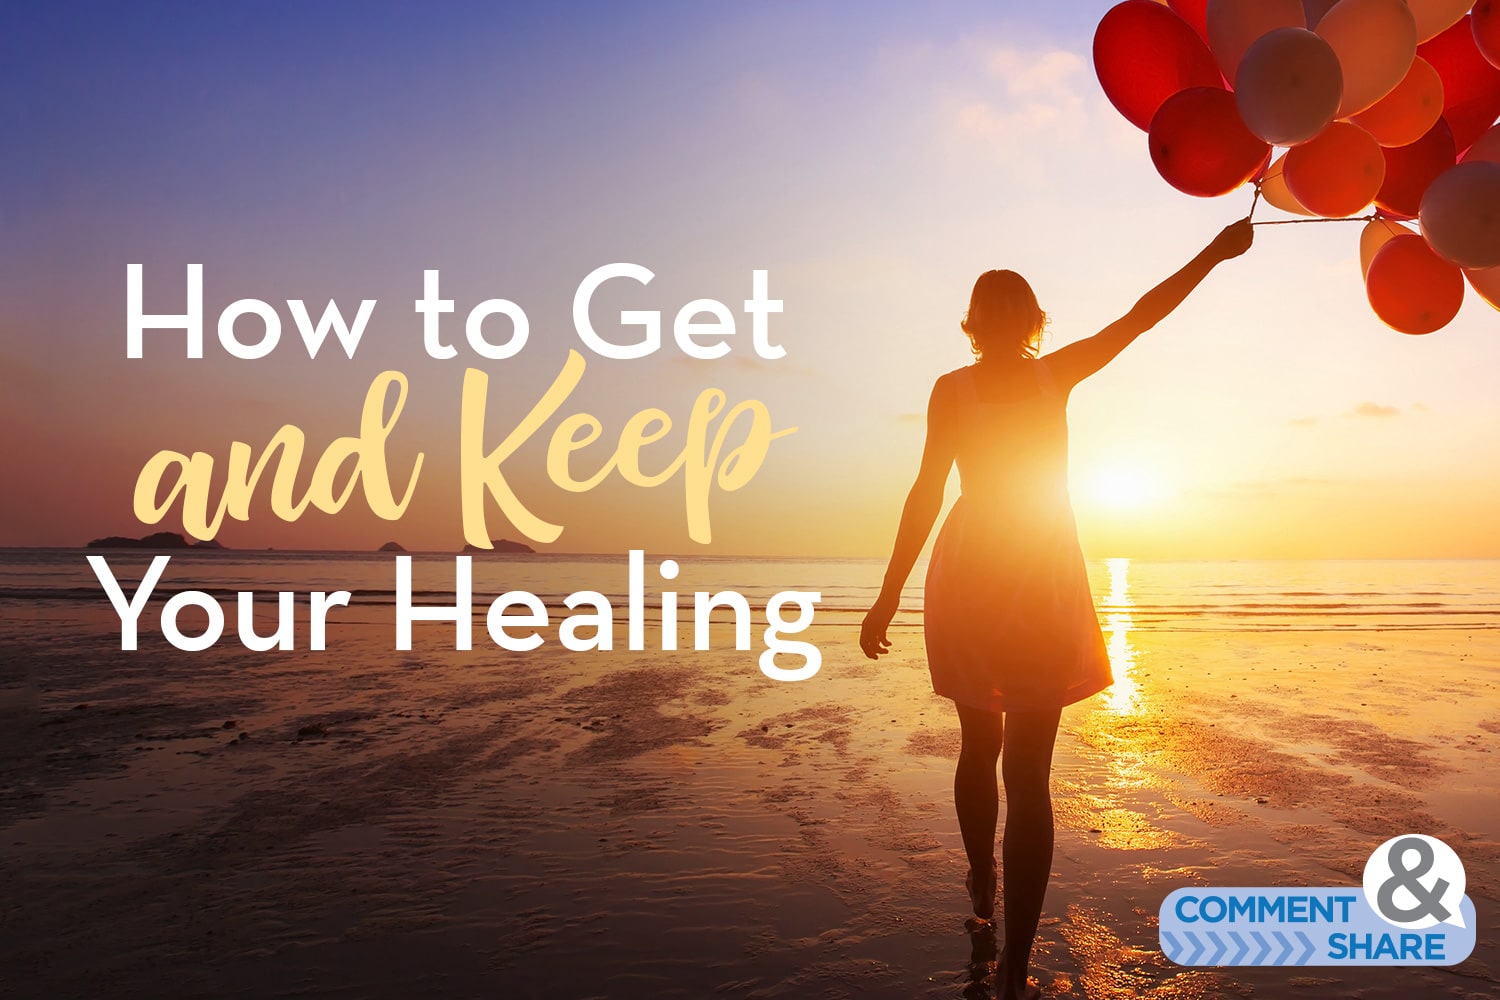 How to Get and Keep Your Healing